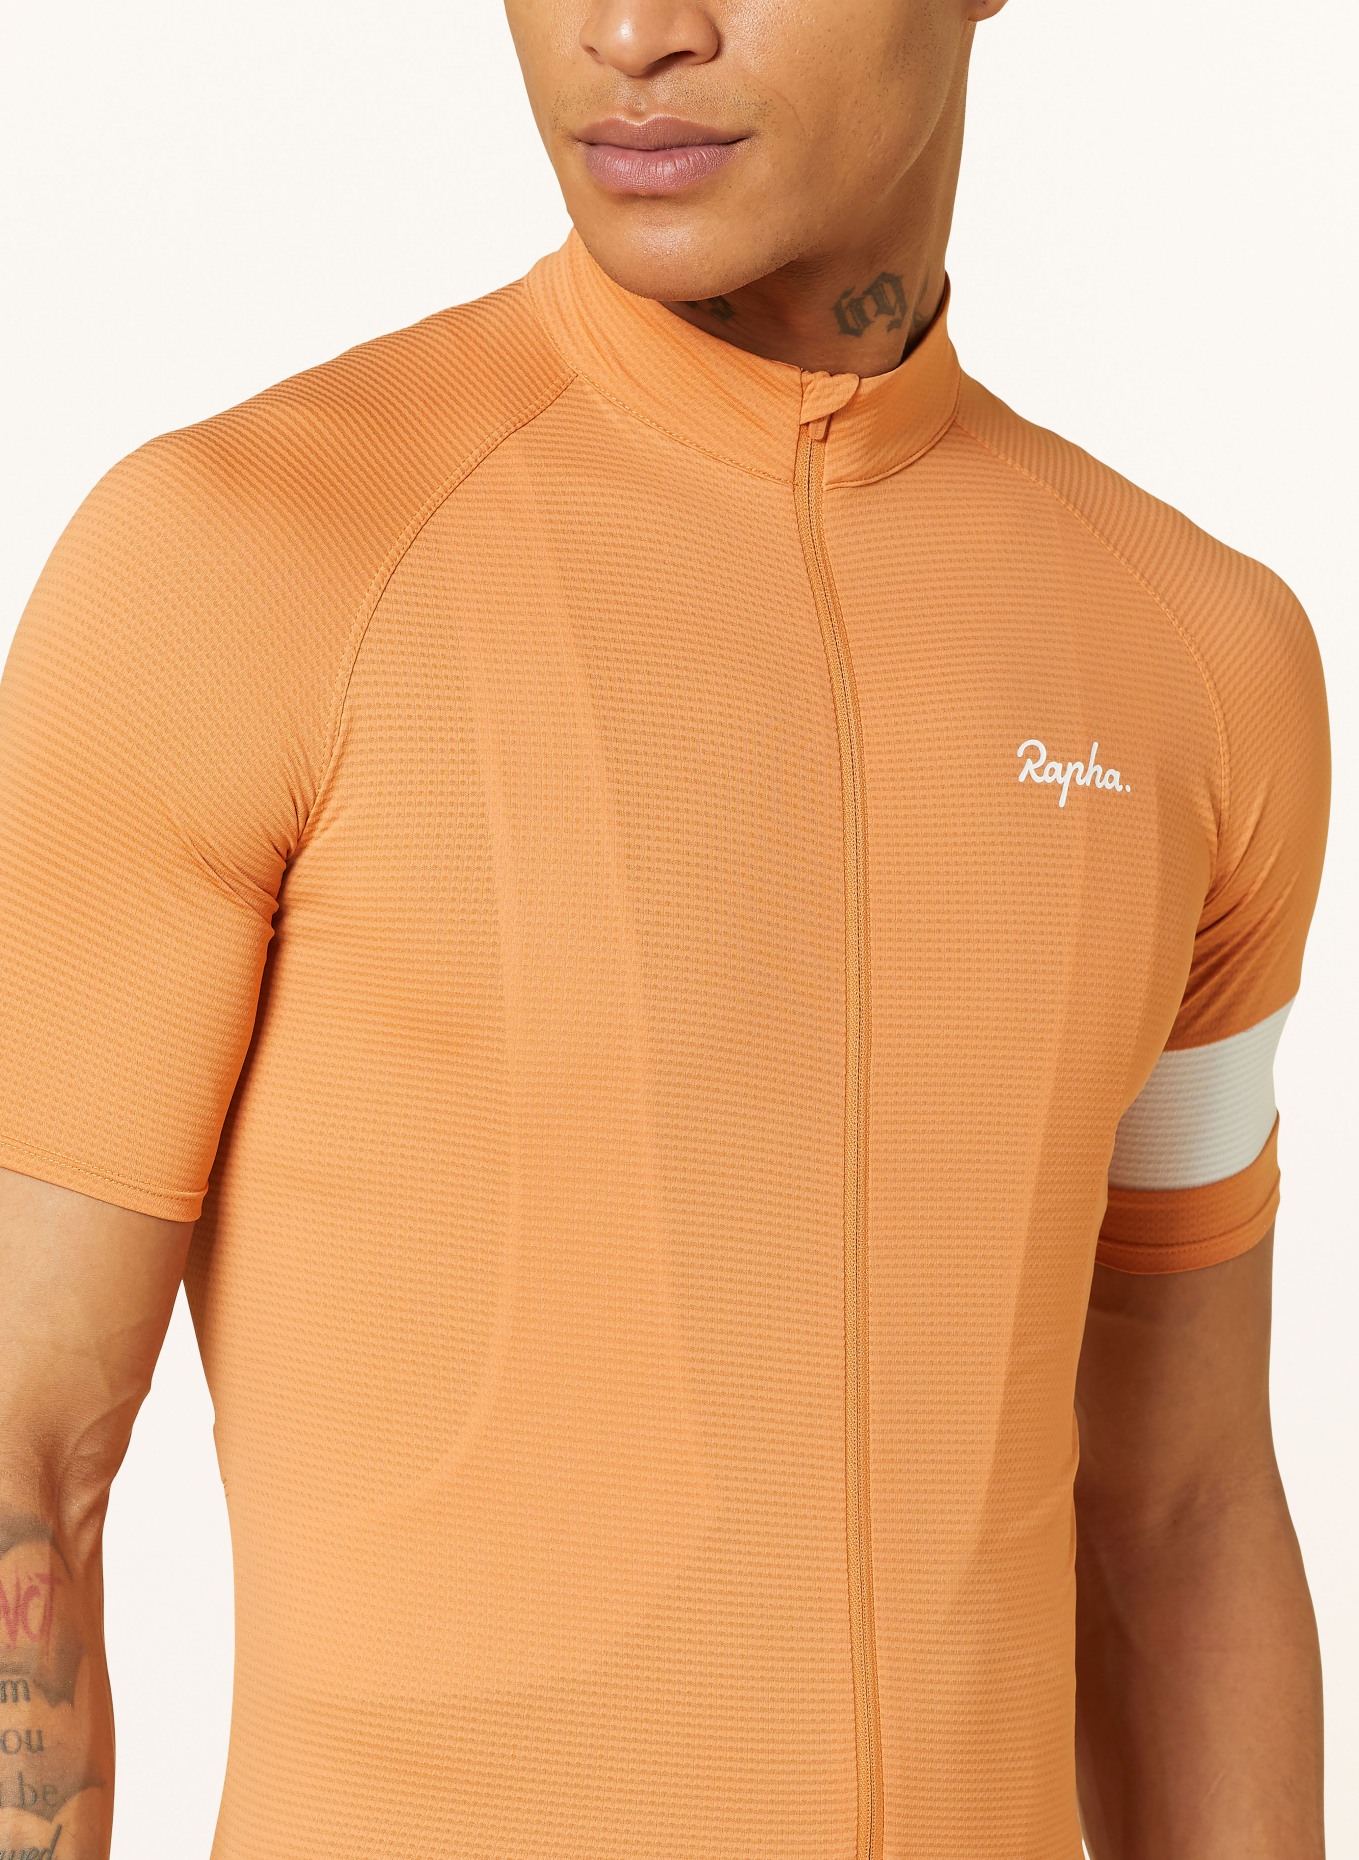 Rapha Cycling jersey CORE LIGHTWEIGHT JERSEY, Color: ORANGE (Image 4)